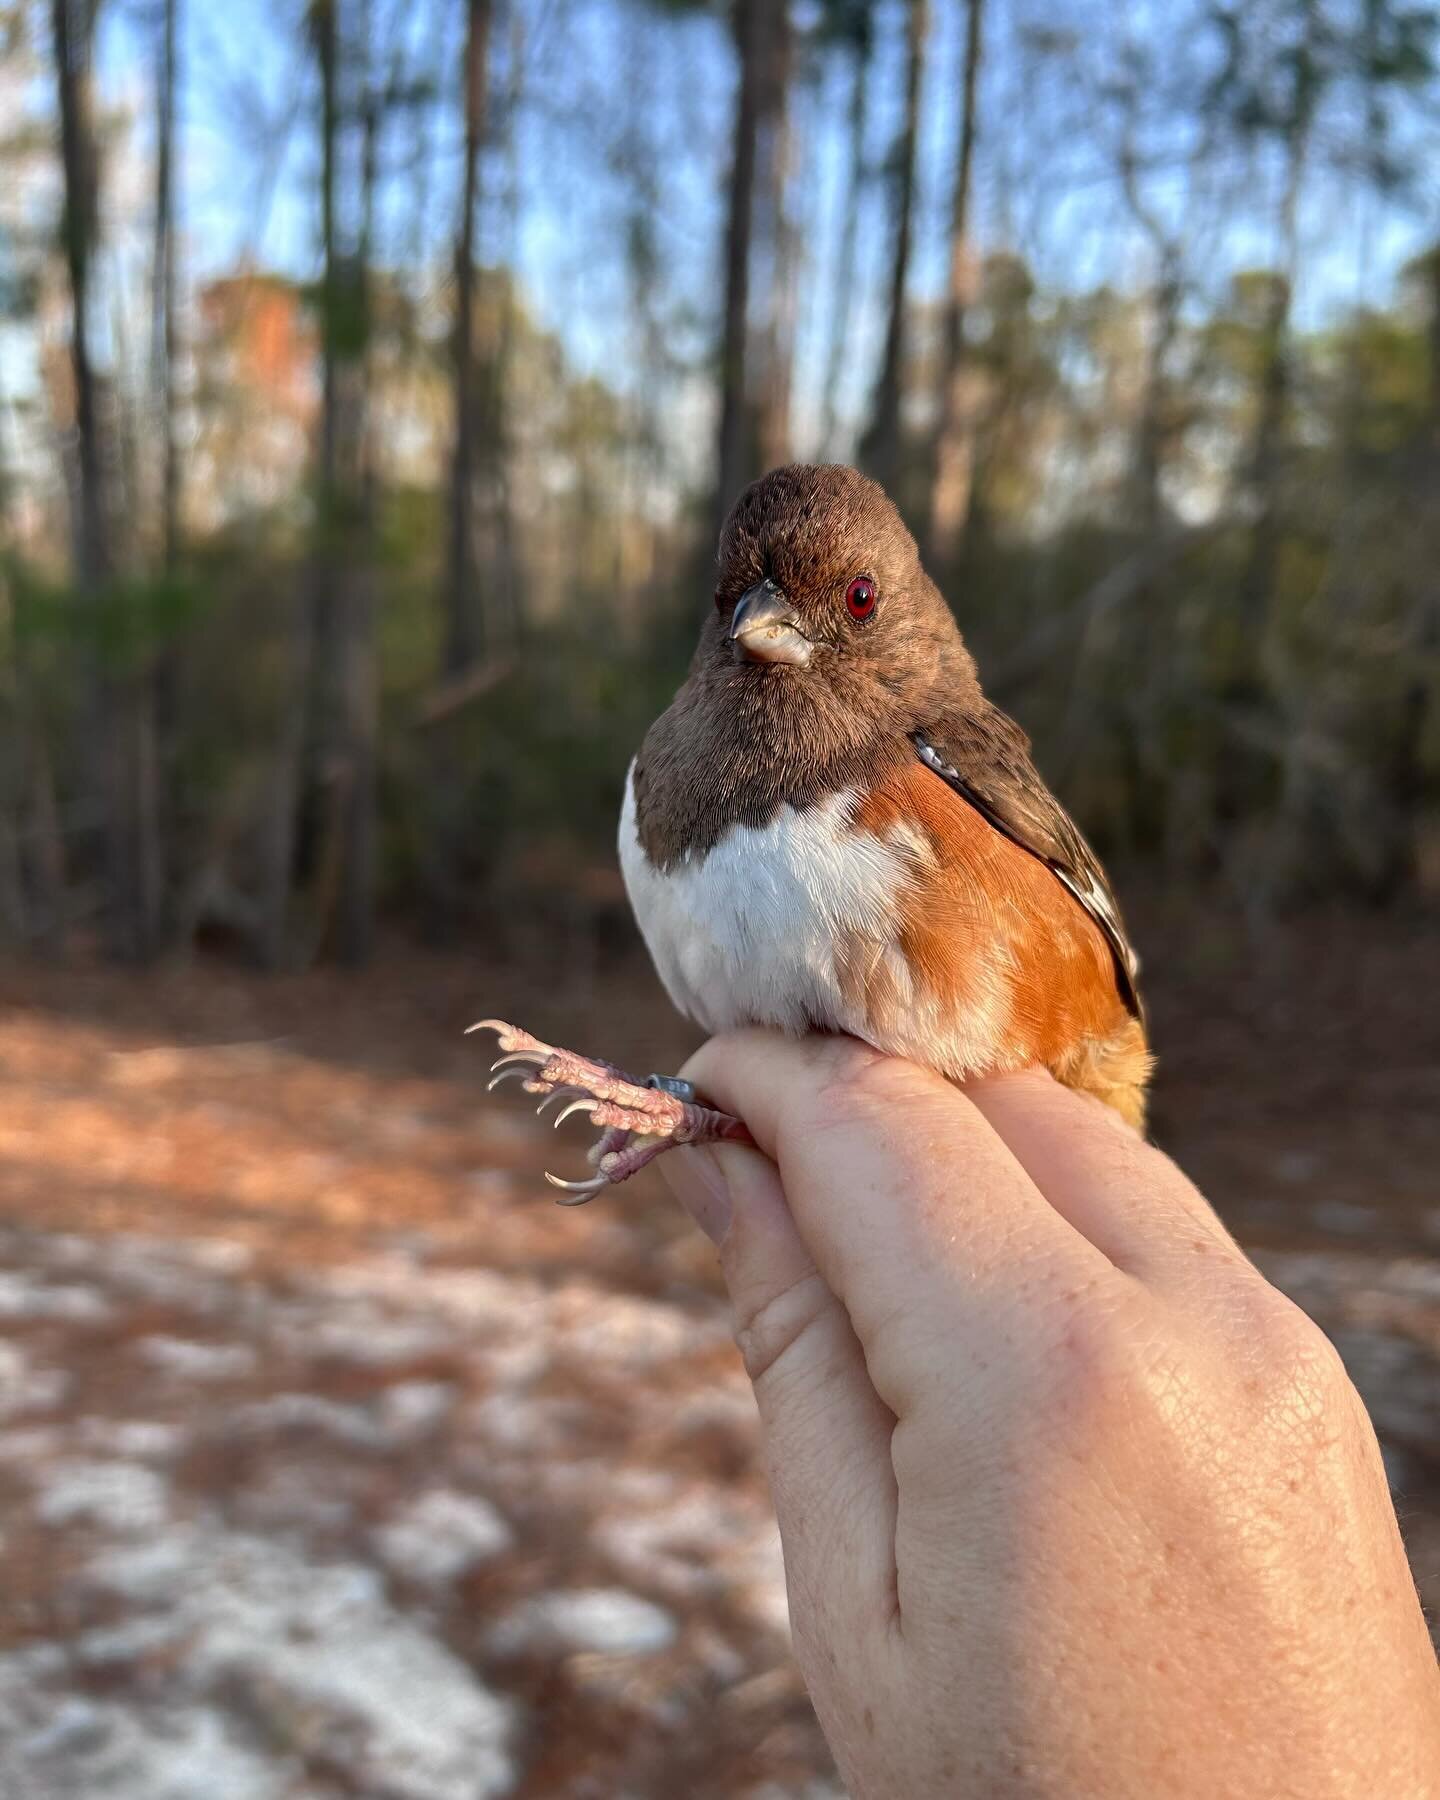 This female Eastern Towhee is just as displeased as we are with the high winds keeping us out of the field today. 

All banding is being conducted under a federally authorized Bird Banding Permit issued by the U.S. Geological Survey&rsquo;s BBL

#EAT